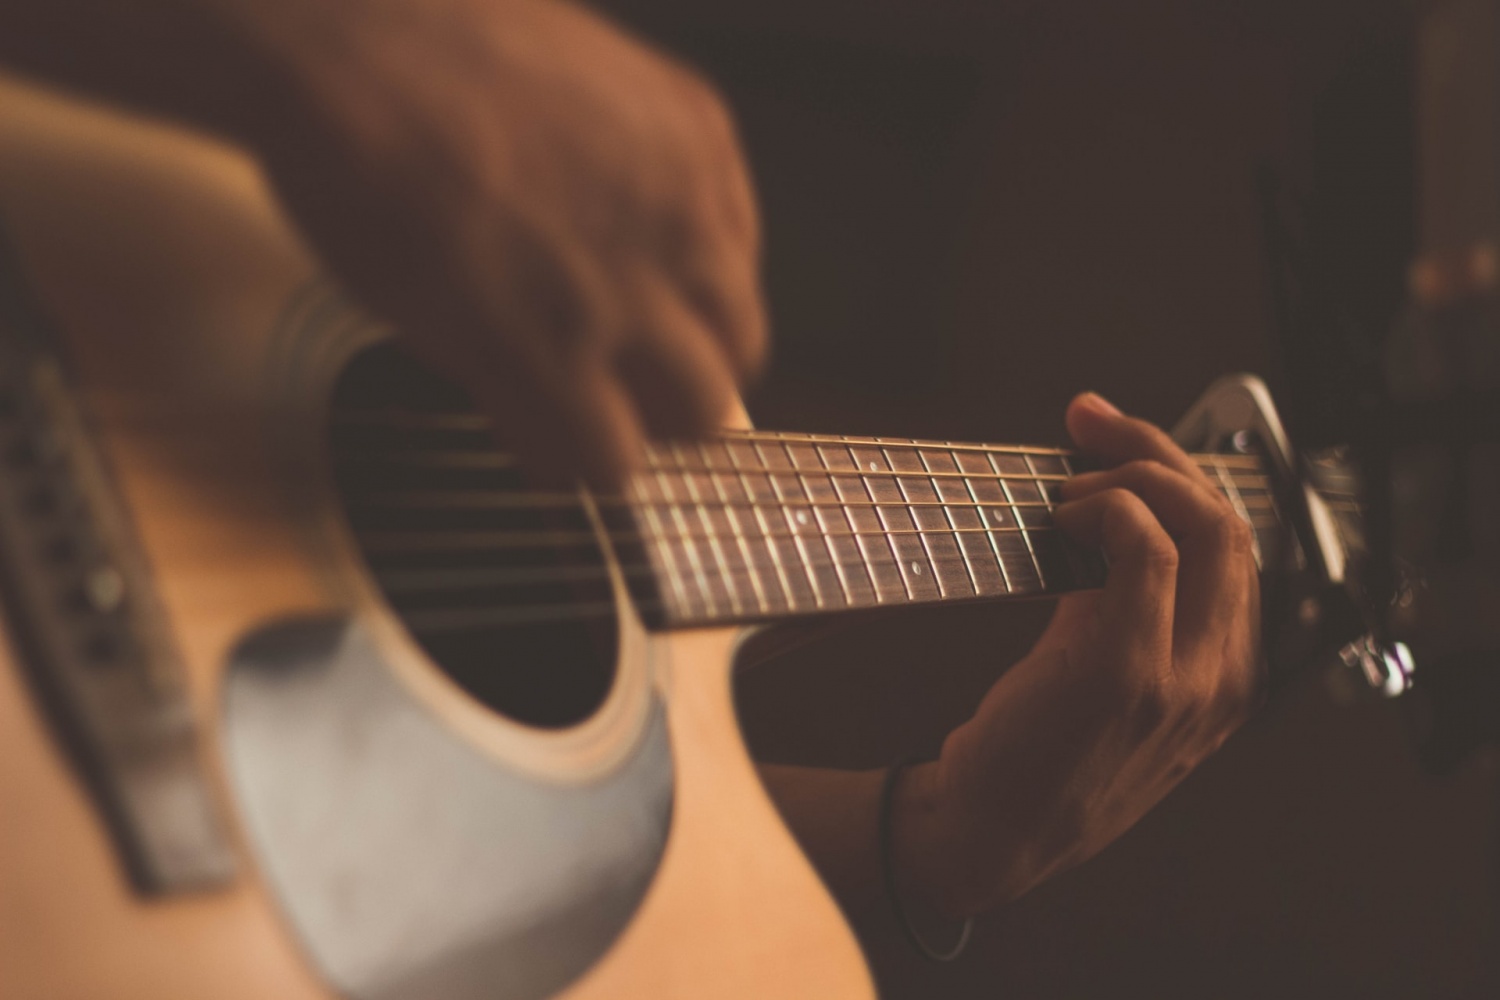 How To Tackle Work Stress With Guitar Classes?